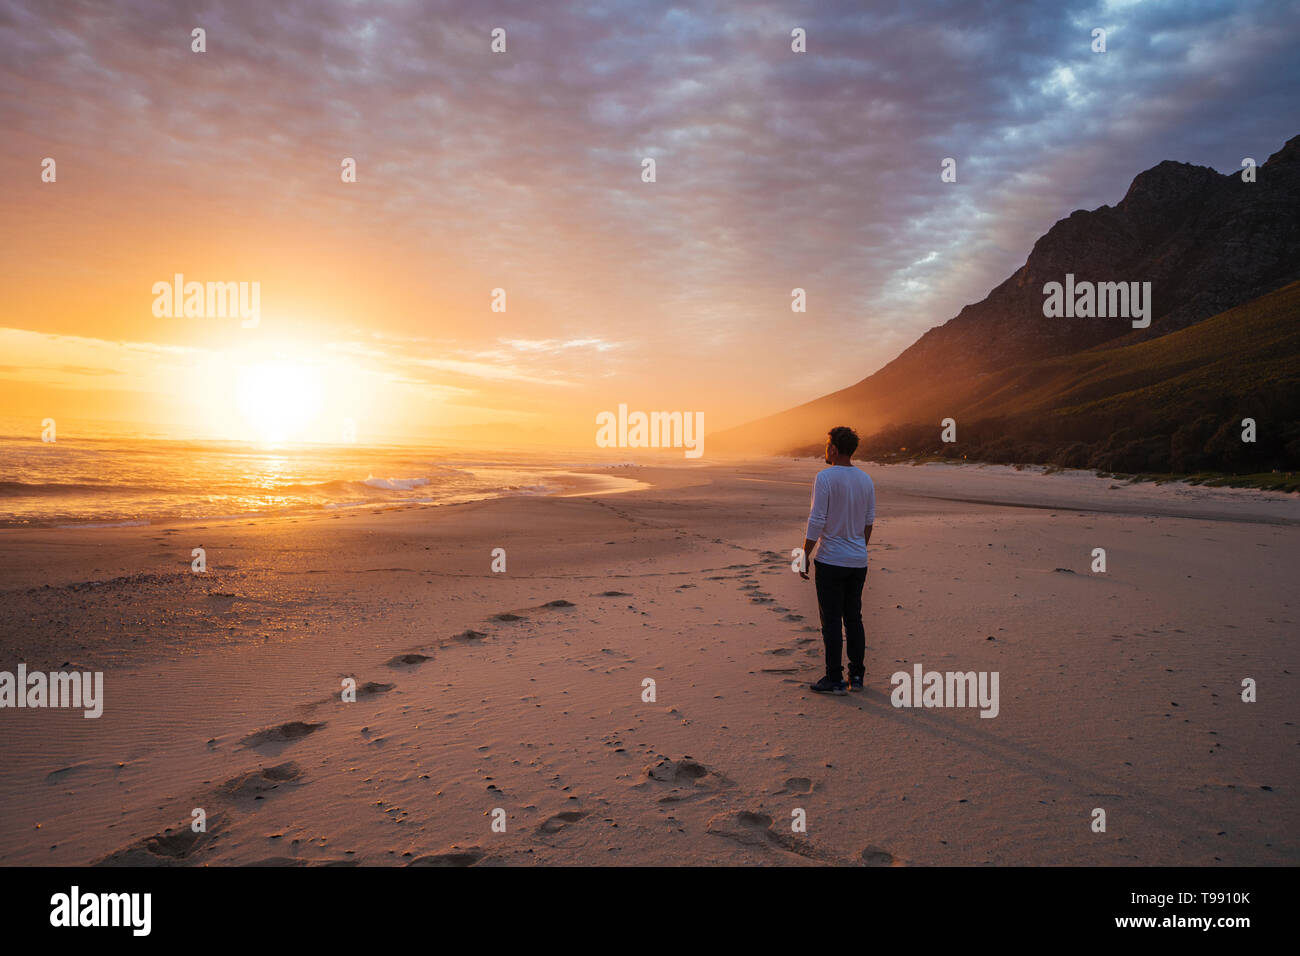 Man on the beach at sunset, Western Cape, South Africa Stock Photo